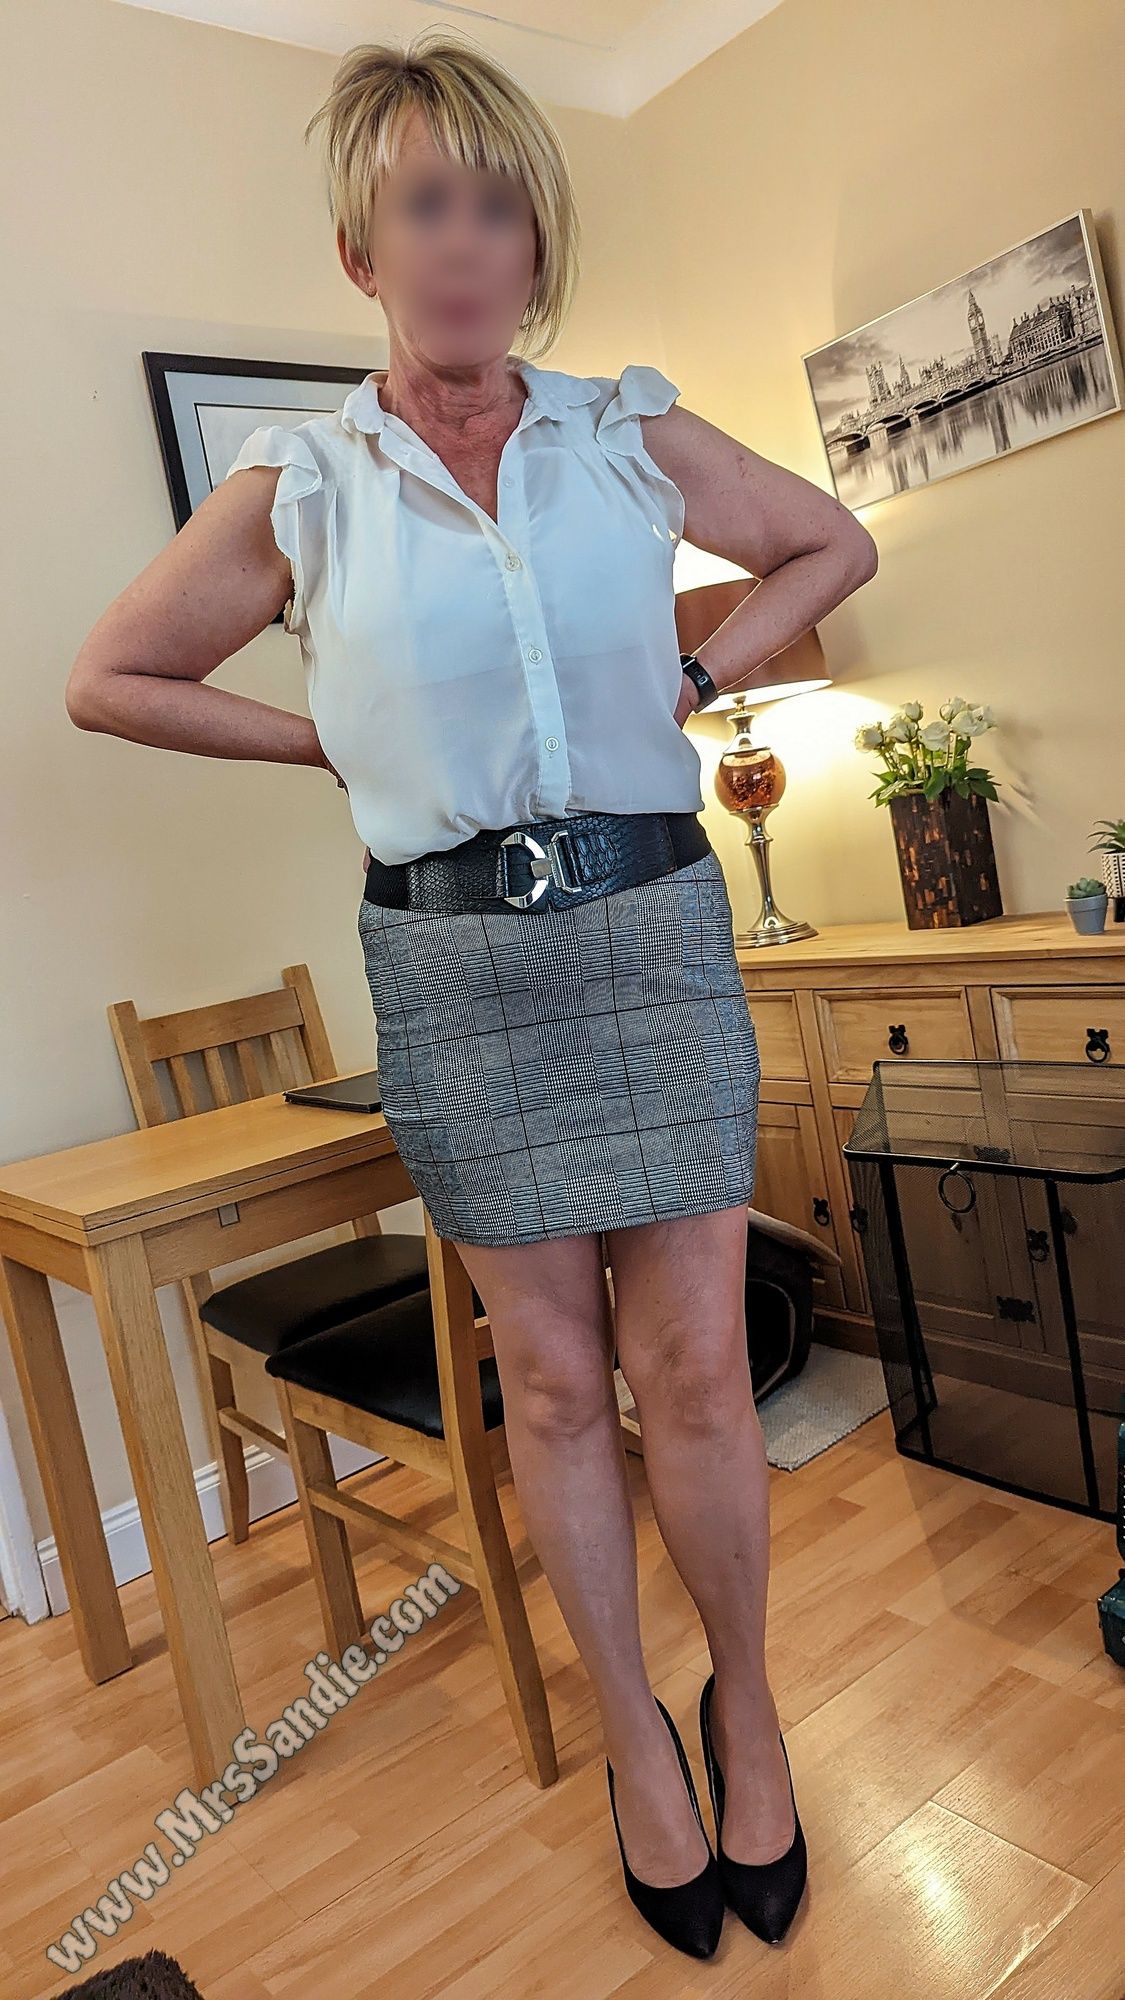 Short skirt and pantyhose for work. #5